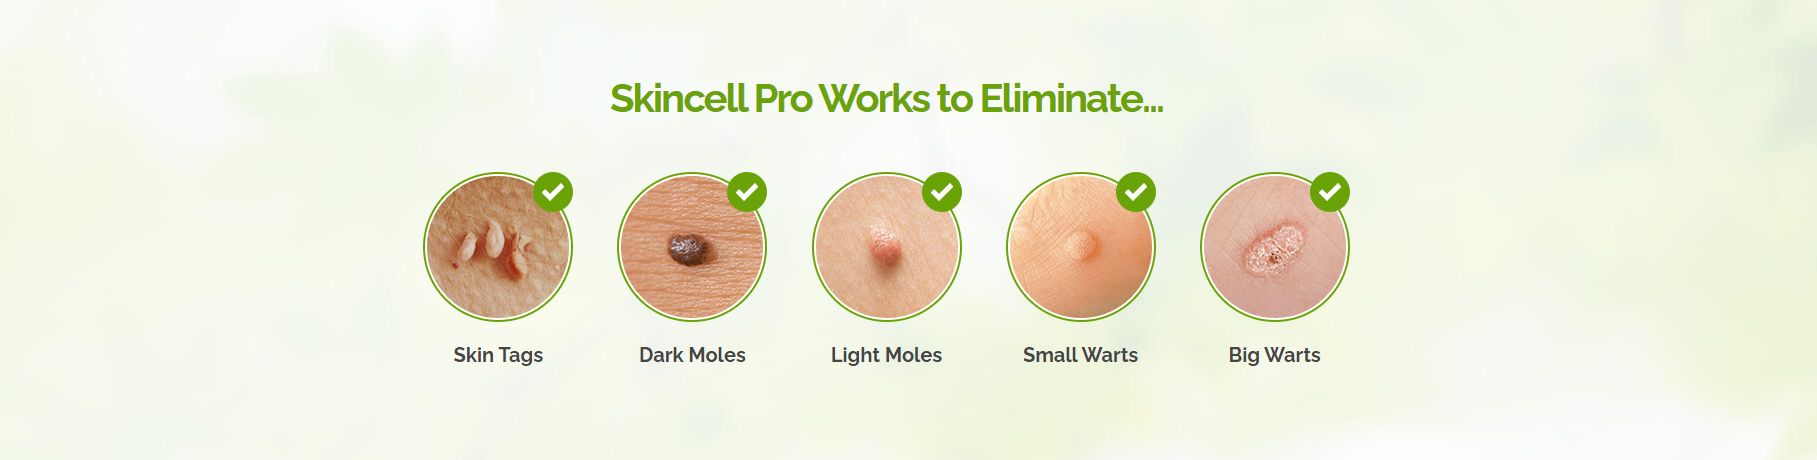 skincell pro work